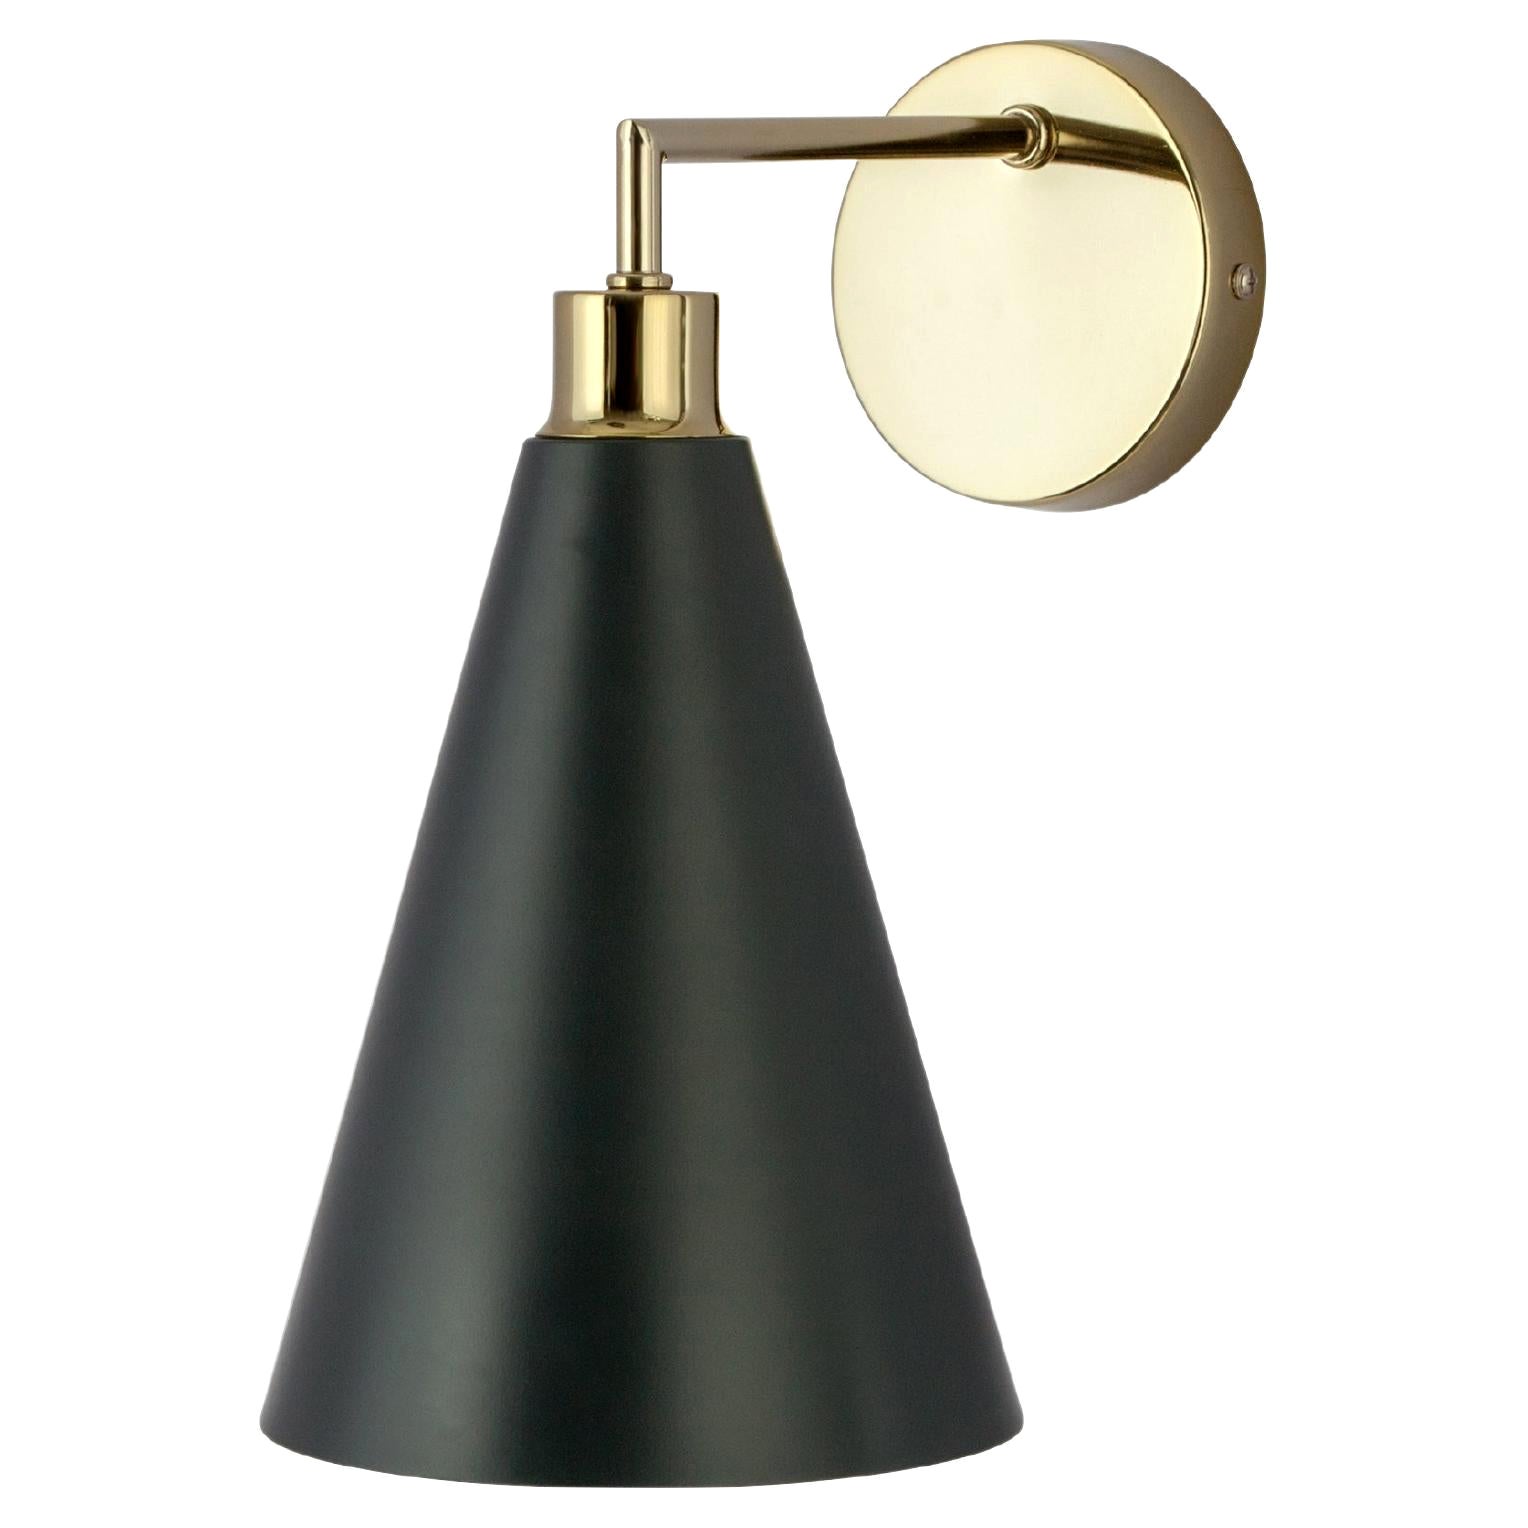 Houseof Charcoal Grey Cone Shade Wall Light with Metal and Brass